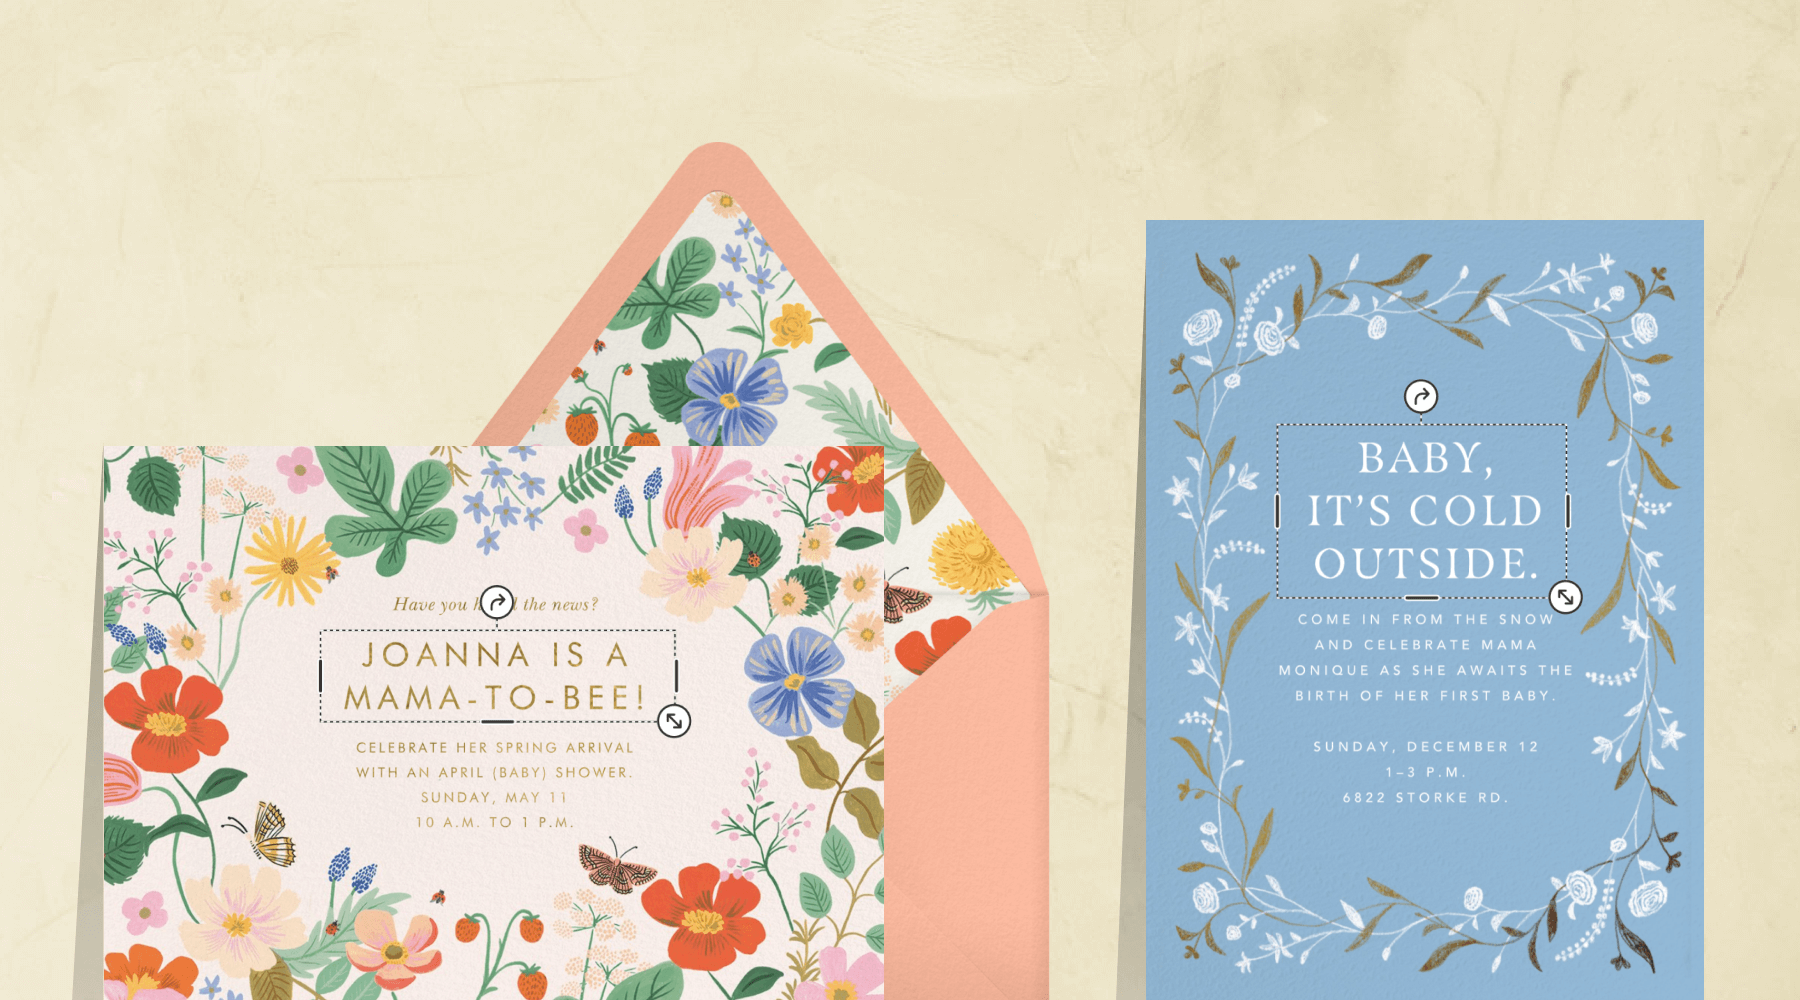 An invitation with colorful flowers and a matching pink envelope; a blue invitation with white and gold floral border.